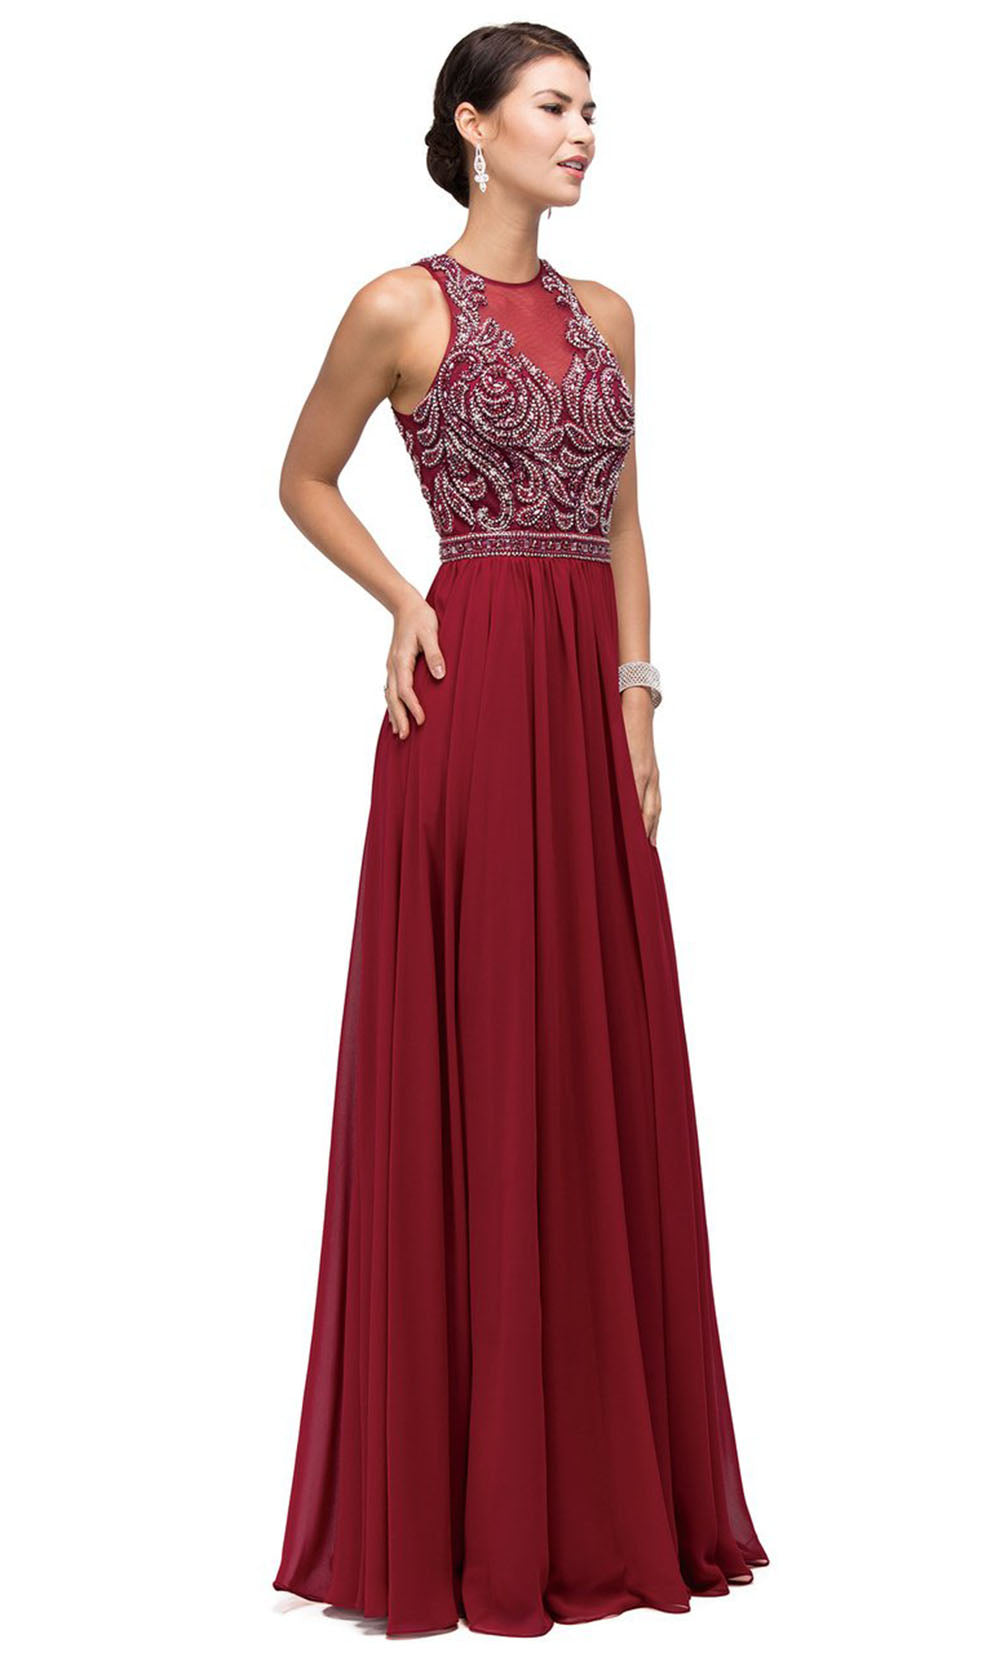 Dancing Queen - 9689 Embroidered Halter Neck A-Line Dress In Red